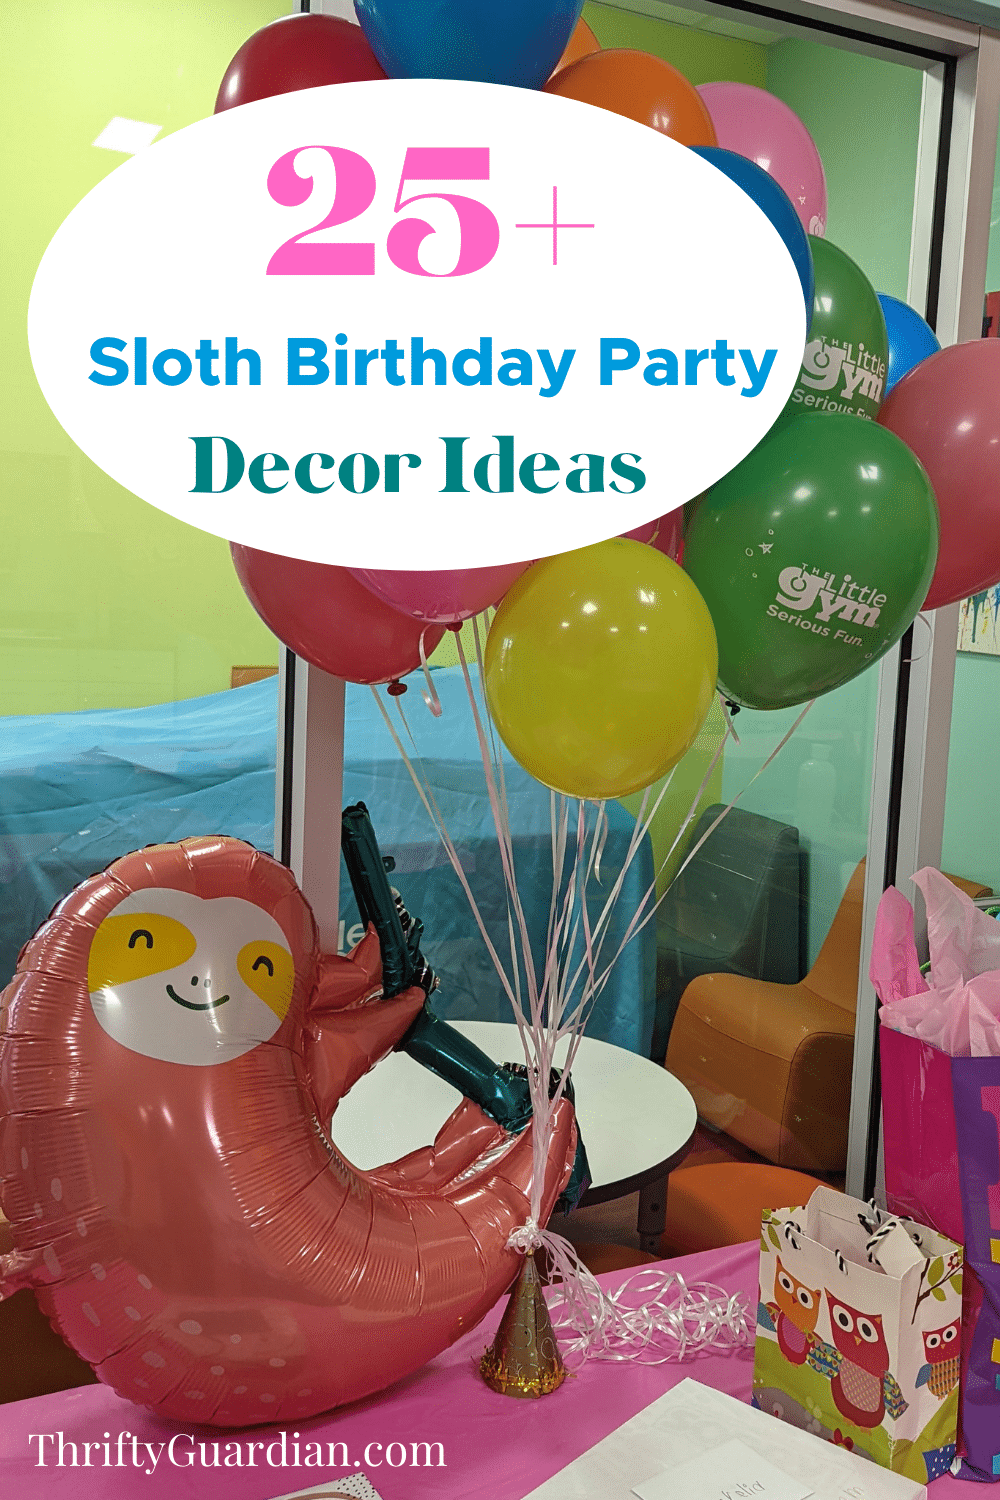 Throwing a Sloth Themed Birthday Party